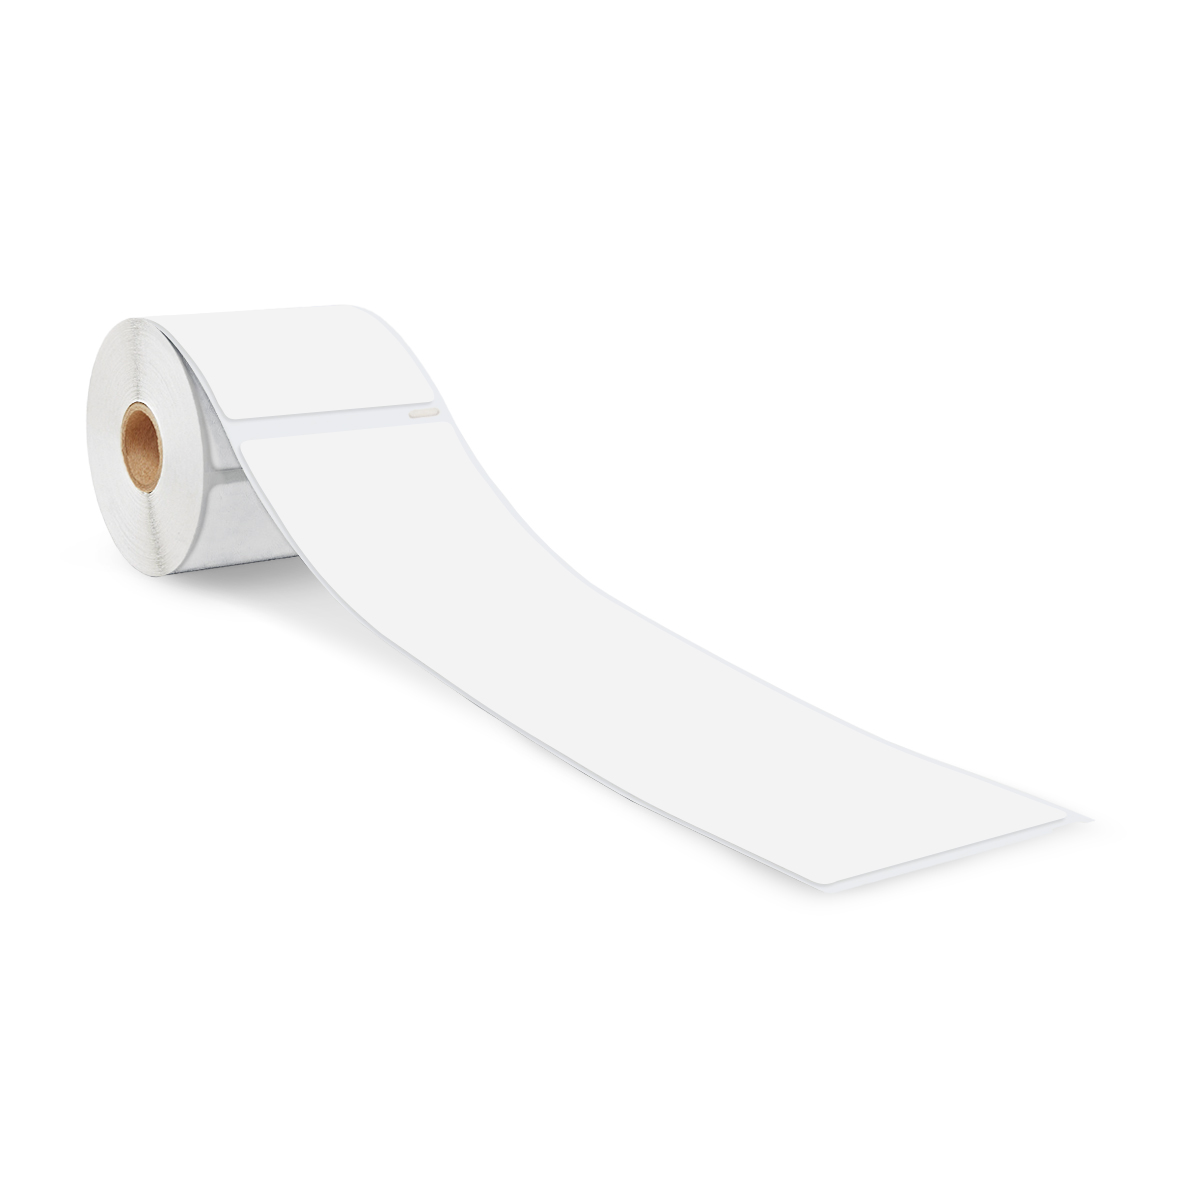 RollsLink 4 Rolls DYMO Compatible 99019 Labels 2-5/16 x 7-1/2 59mm x 190mm 4XL and More,150 Labels Per Roll White Paypal/Ebay Internet Postage Labels Compatible with Dymo 450 450 Turbo 